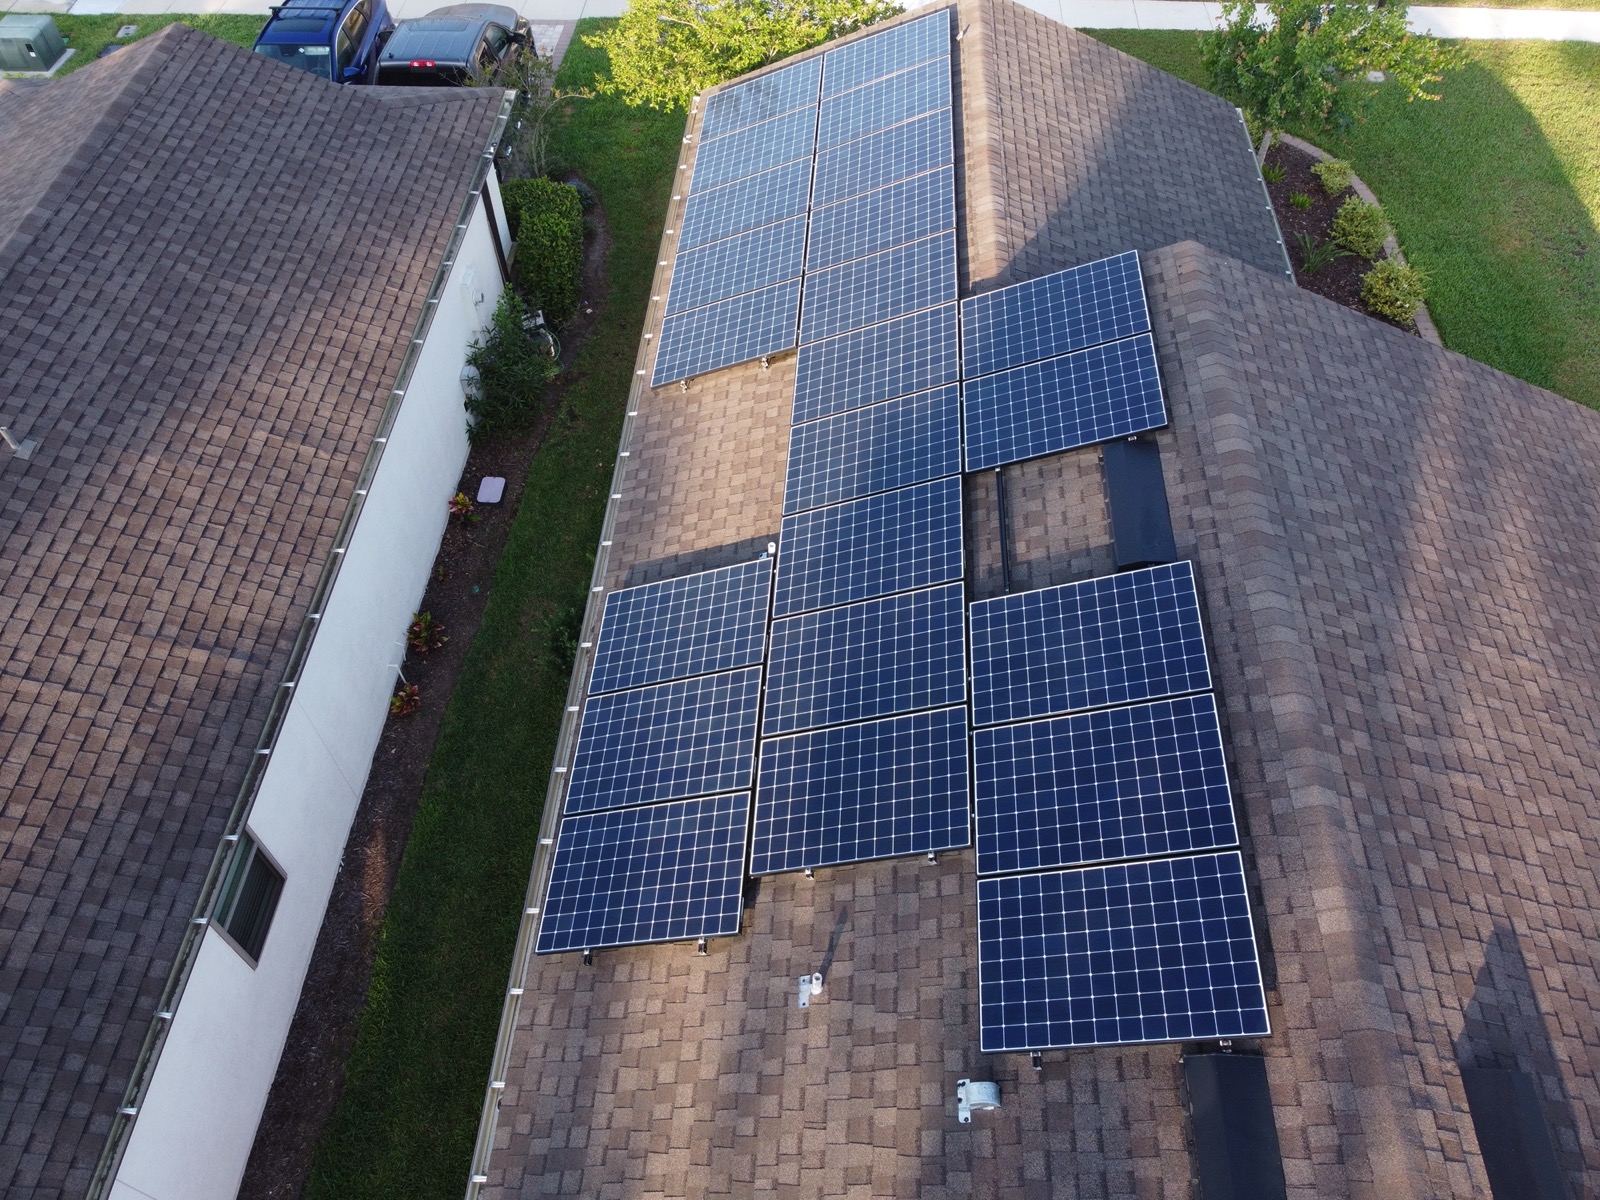 7KW of solar panels on a suburban roof